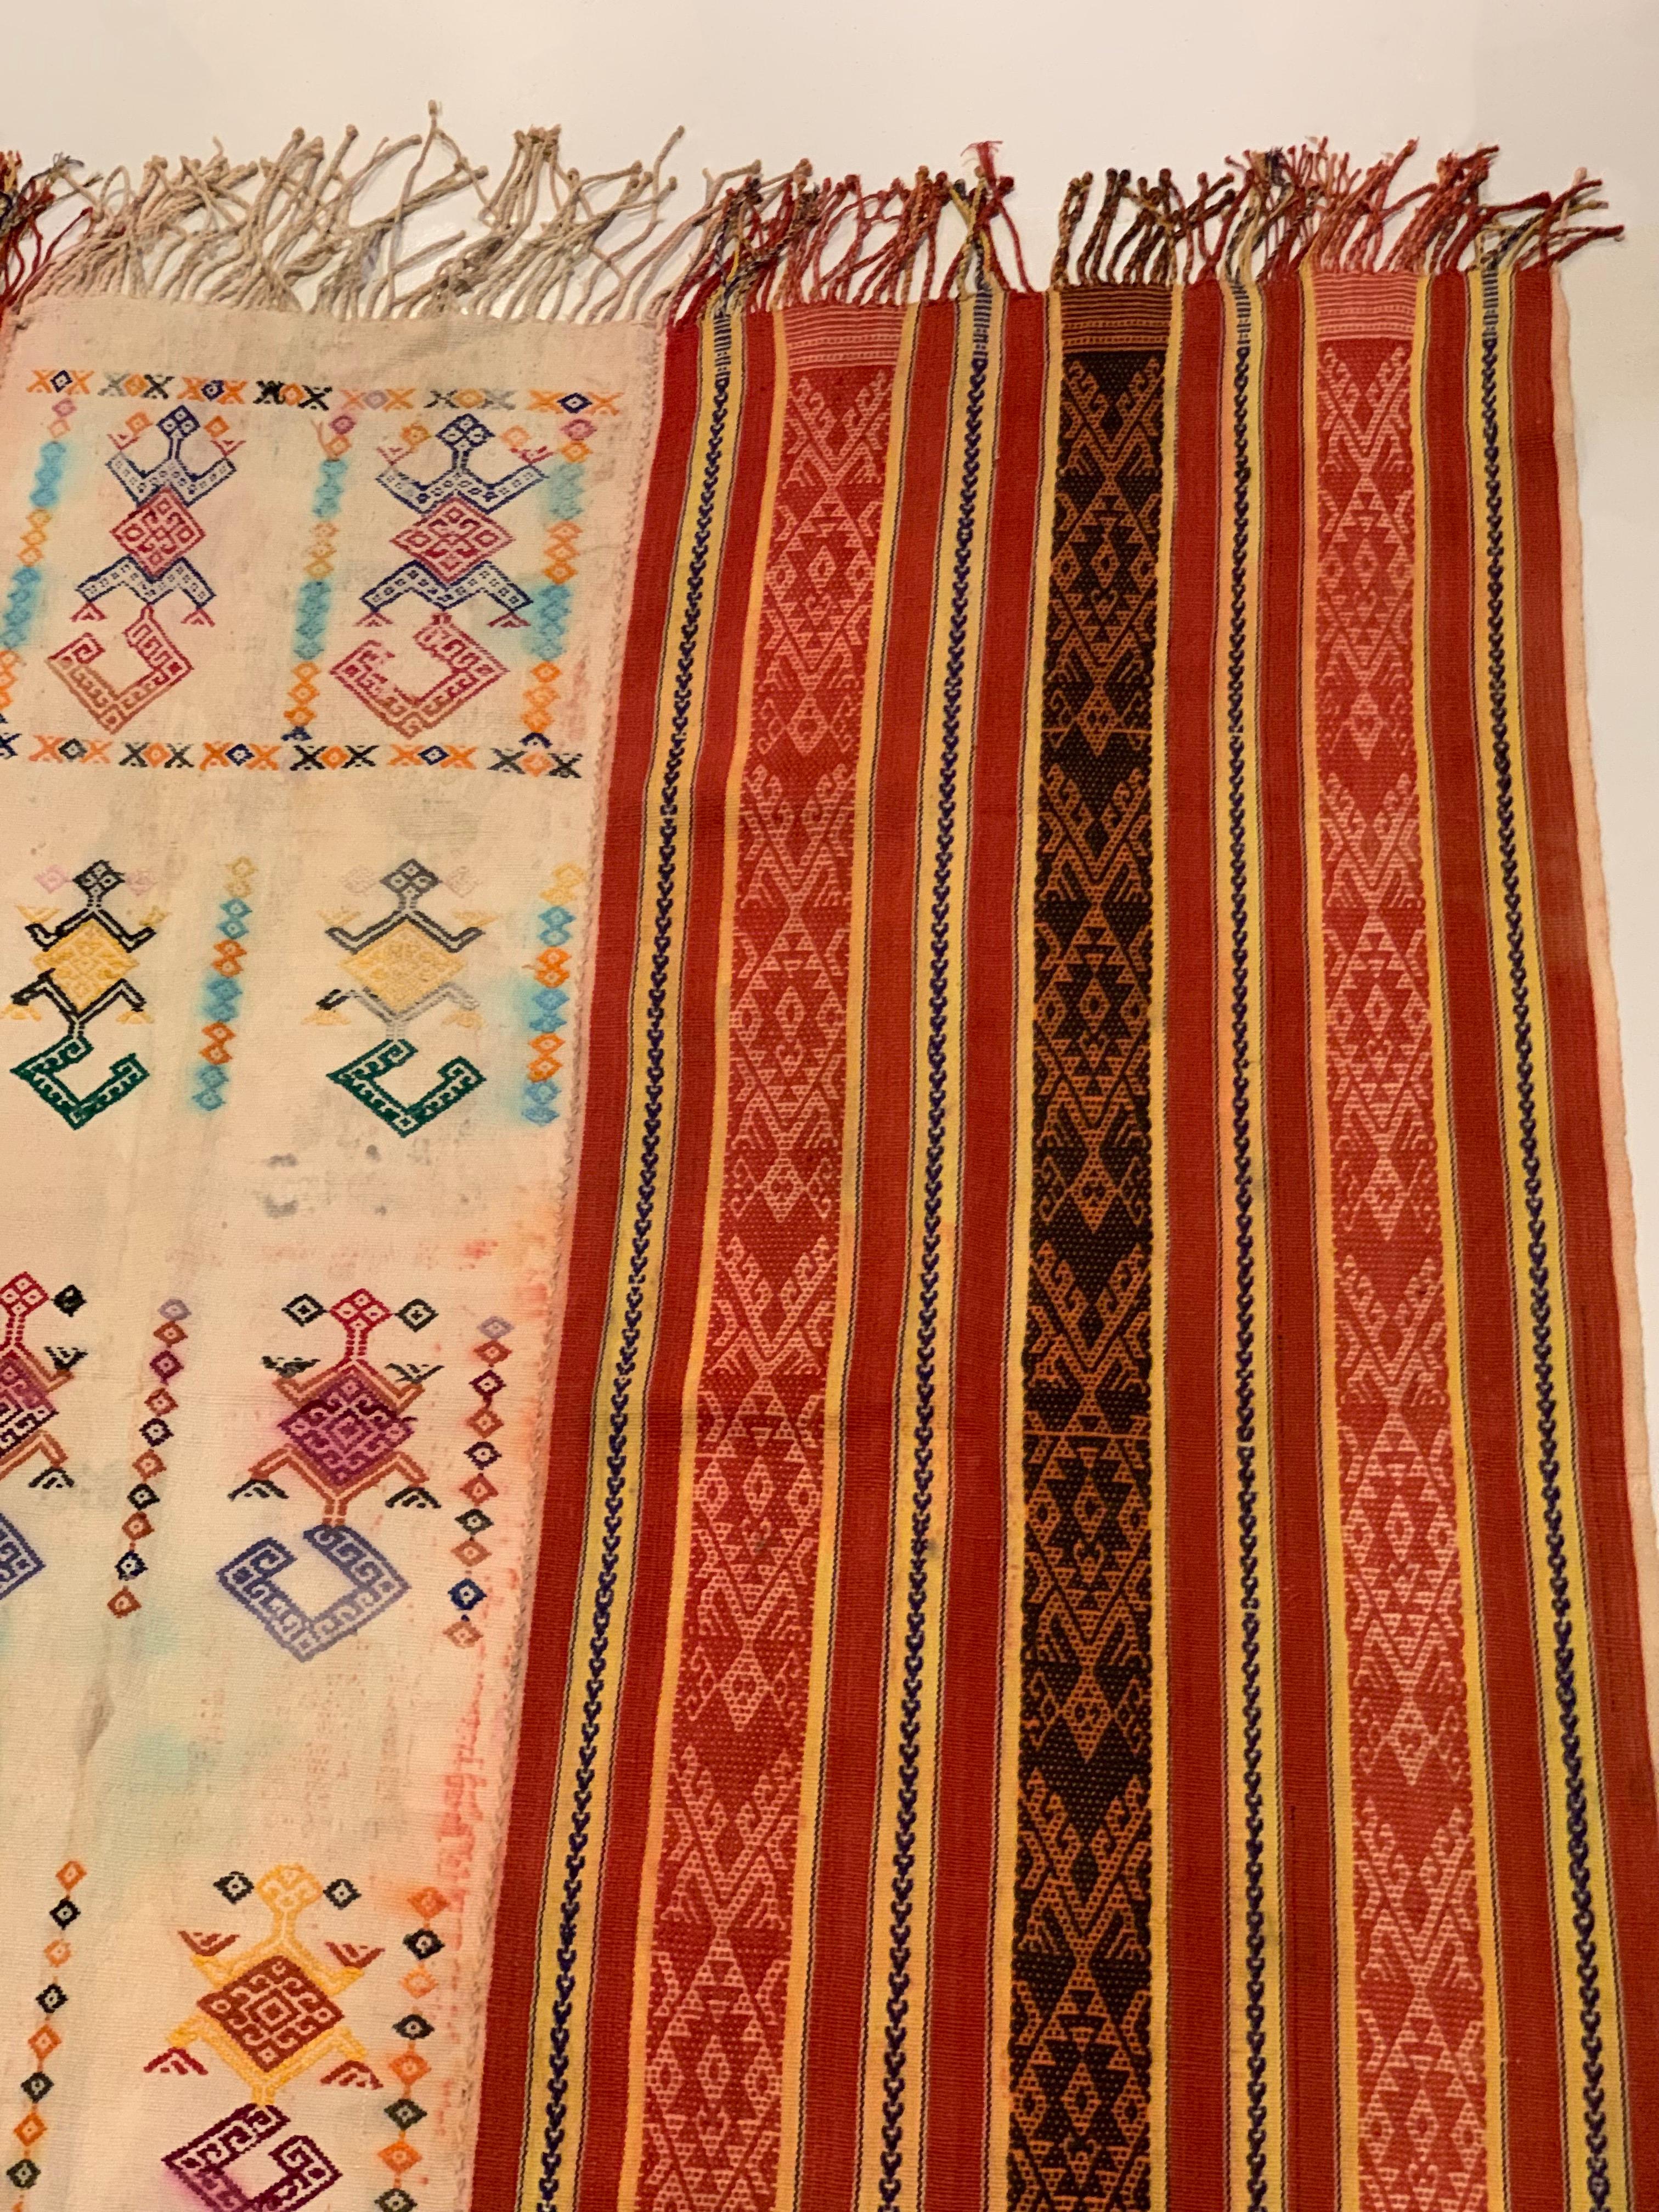 Ikat Textile from Timor Stunning Tribal Motifs & Colors, Indonesia c. 1950 In Good Condition For Sale In Jimbaran, Bali